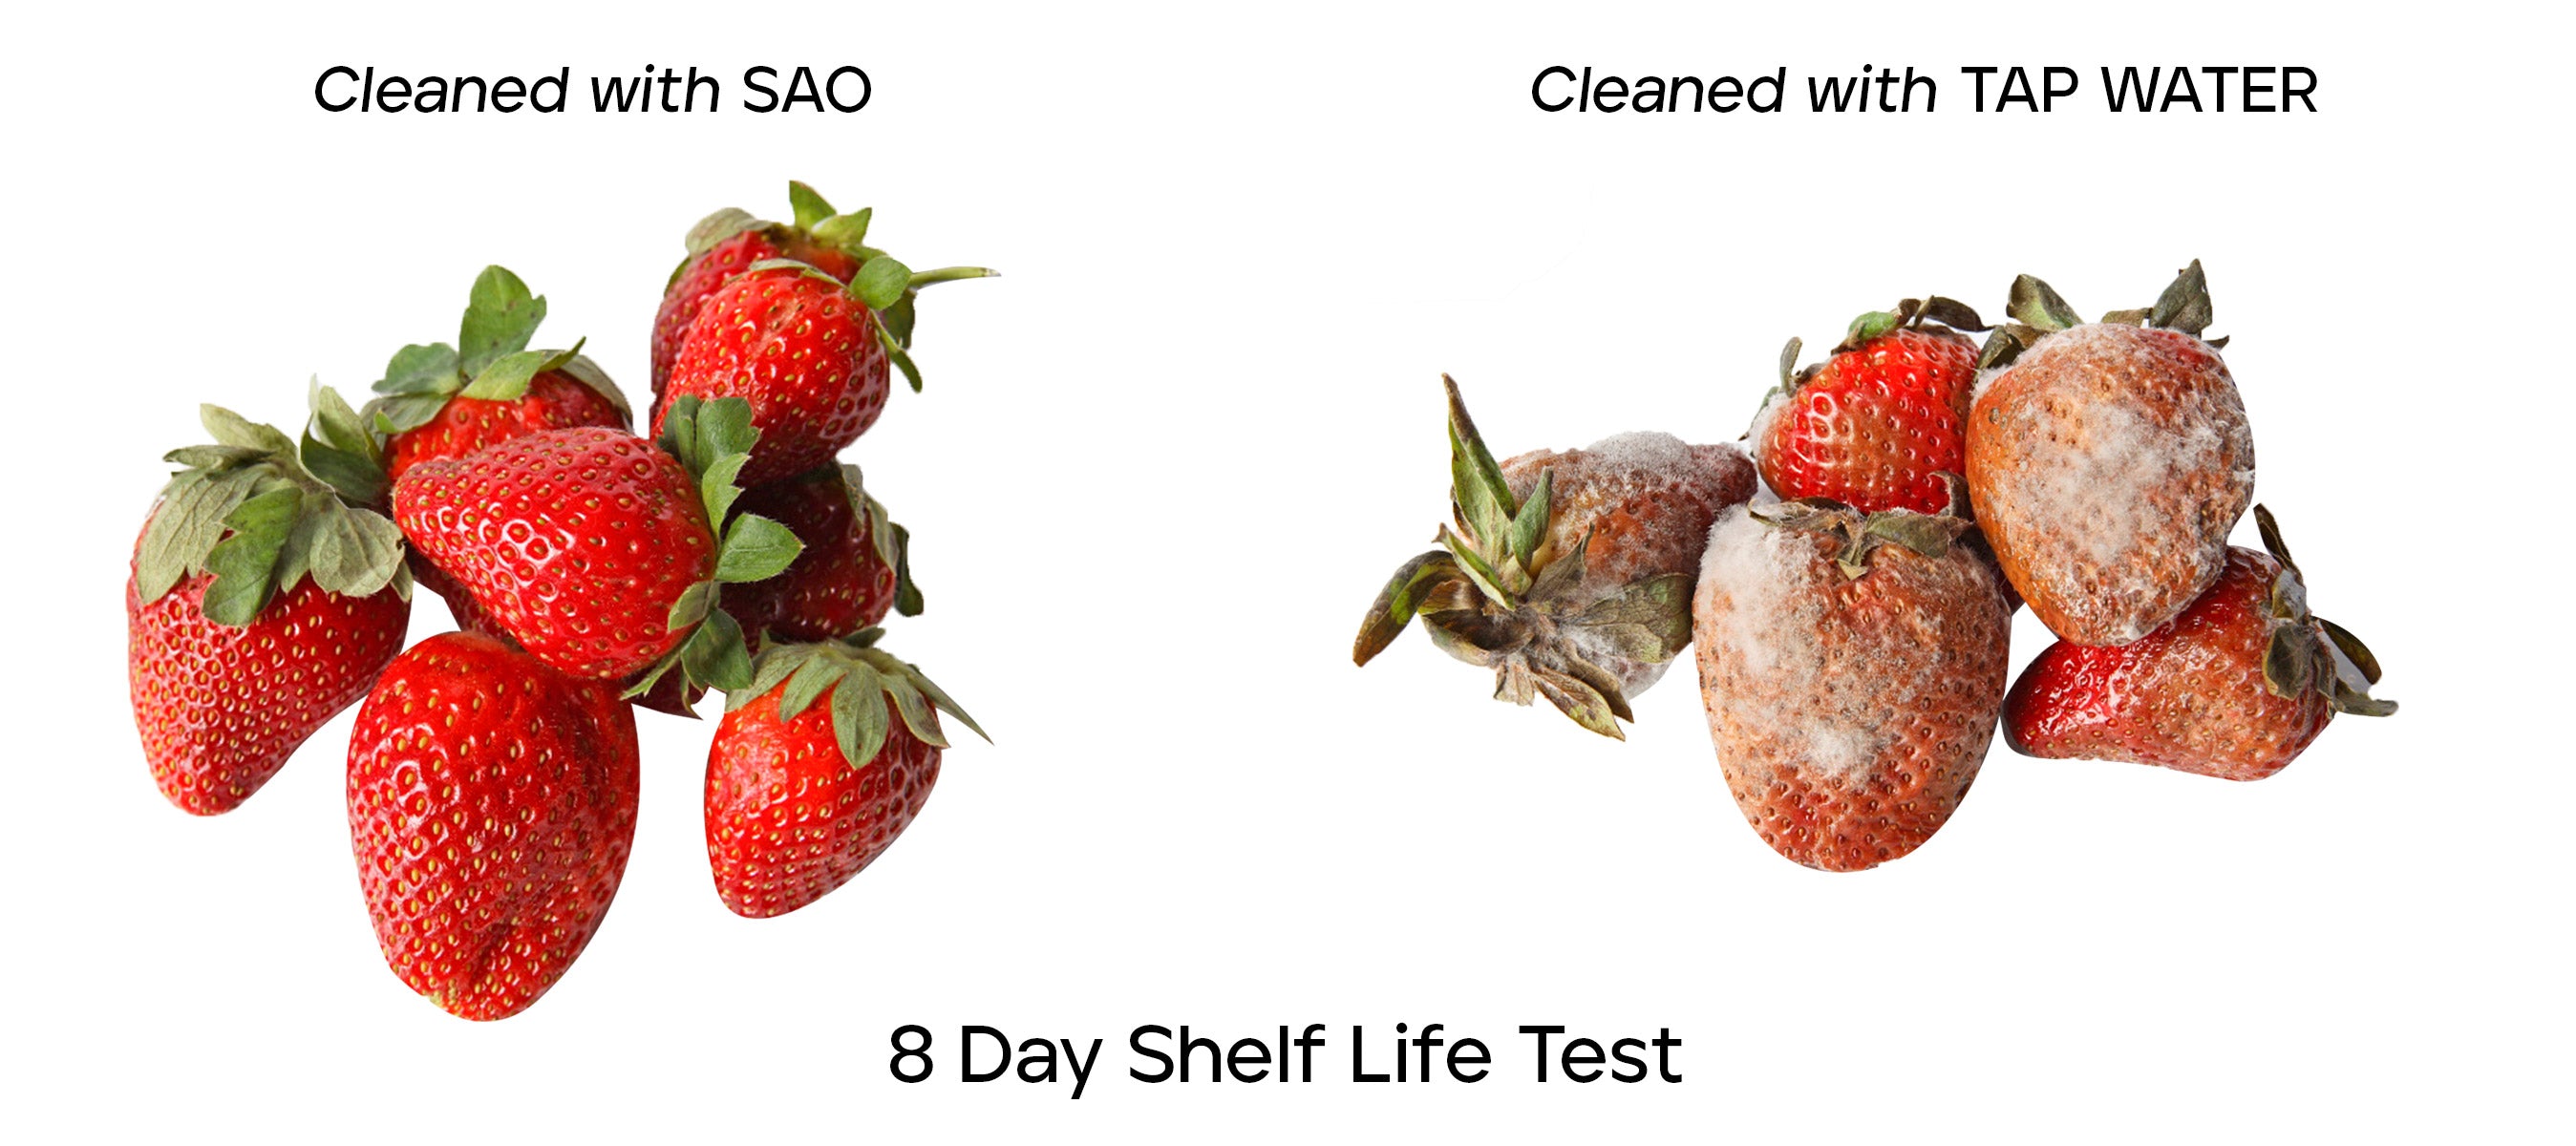 Keep food fresh. Ozone in food processing. Ozone is safe for food. Strawberries last longer with stabilized aqueous ozone. 8 day shelf life test.